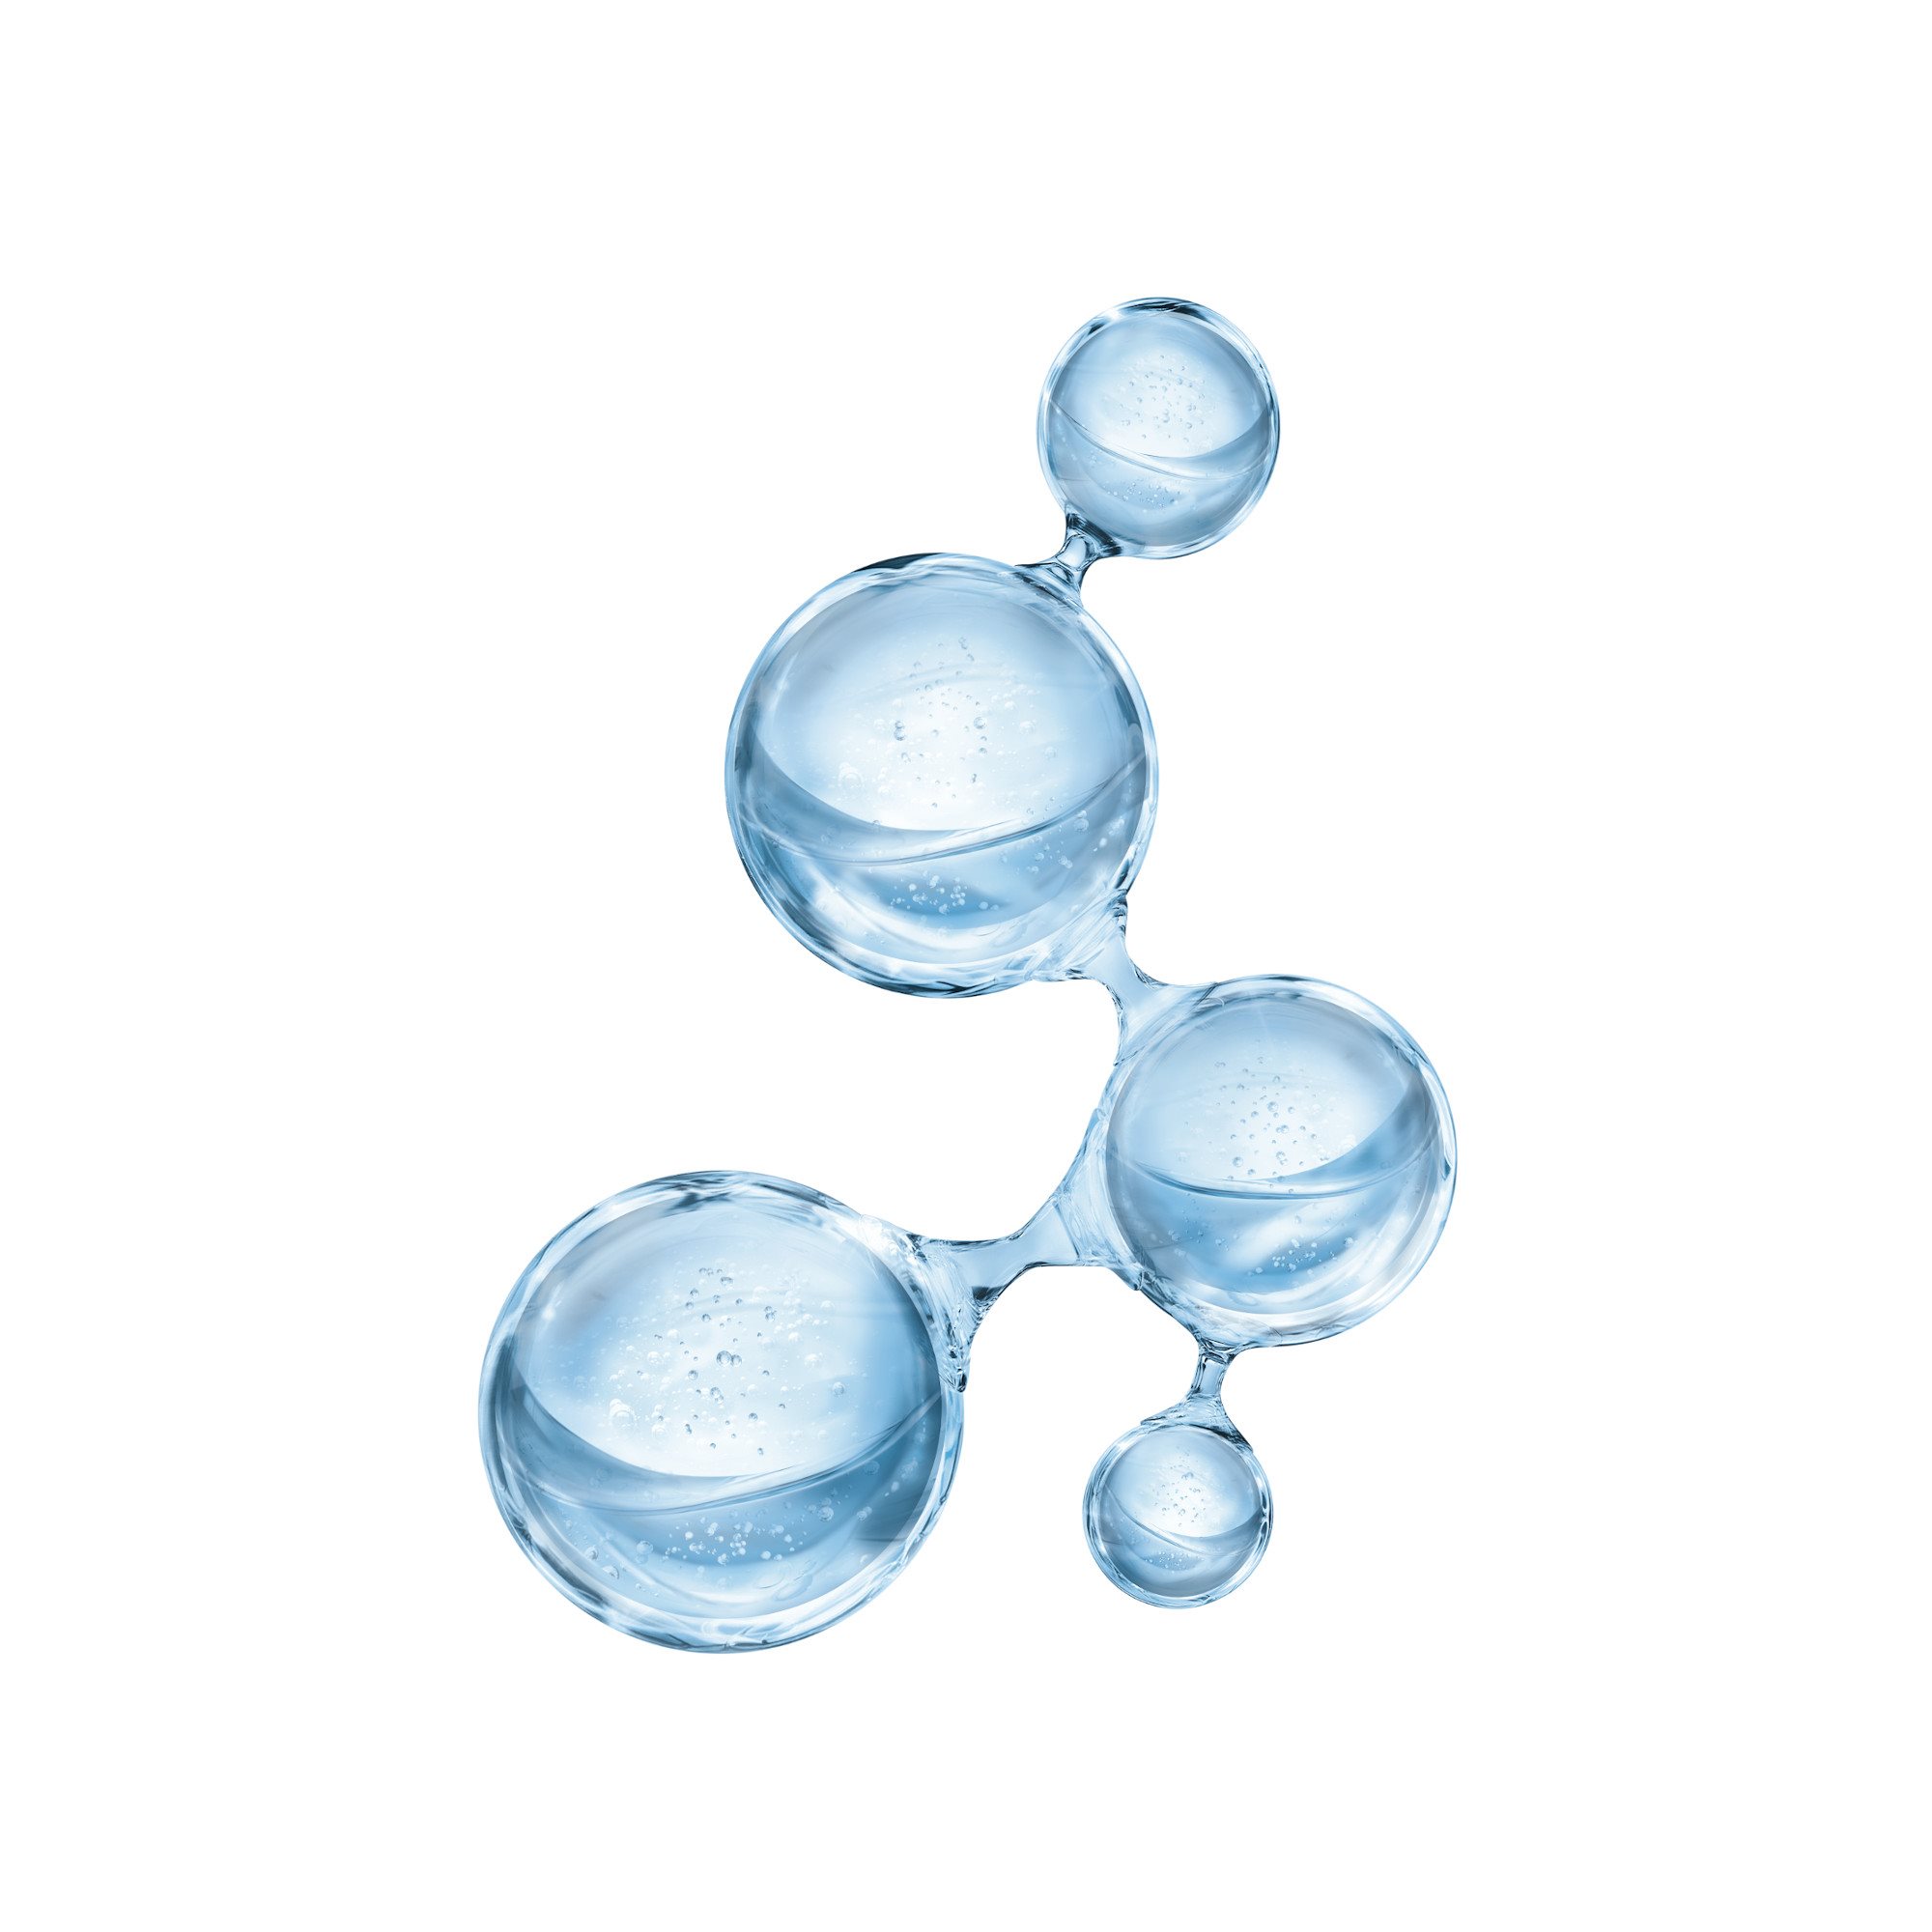 What does hyaluronic acid do for your skin